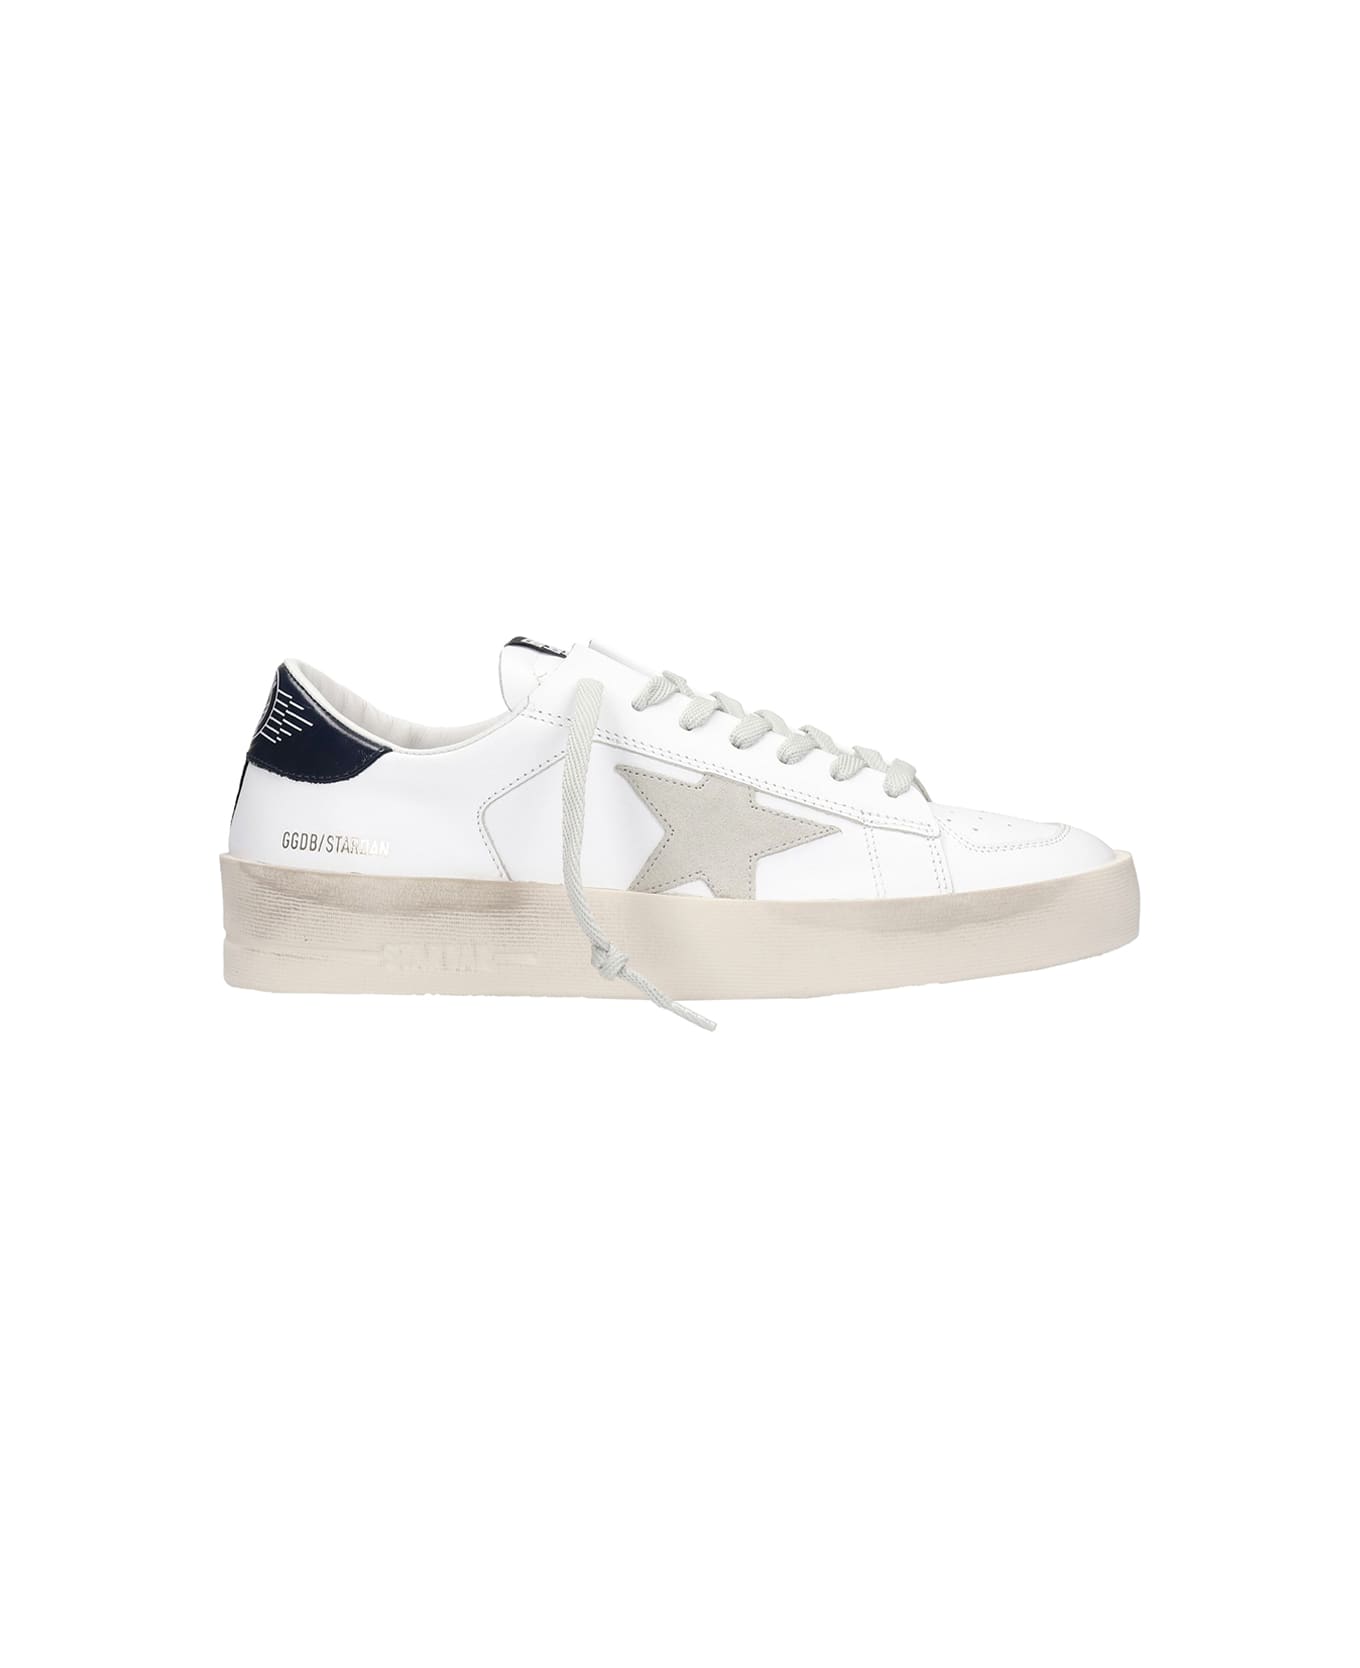 Golden Goose Stardan Leather Upper Suede Star Sneakers - White Ice Blue